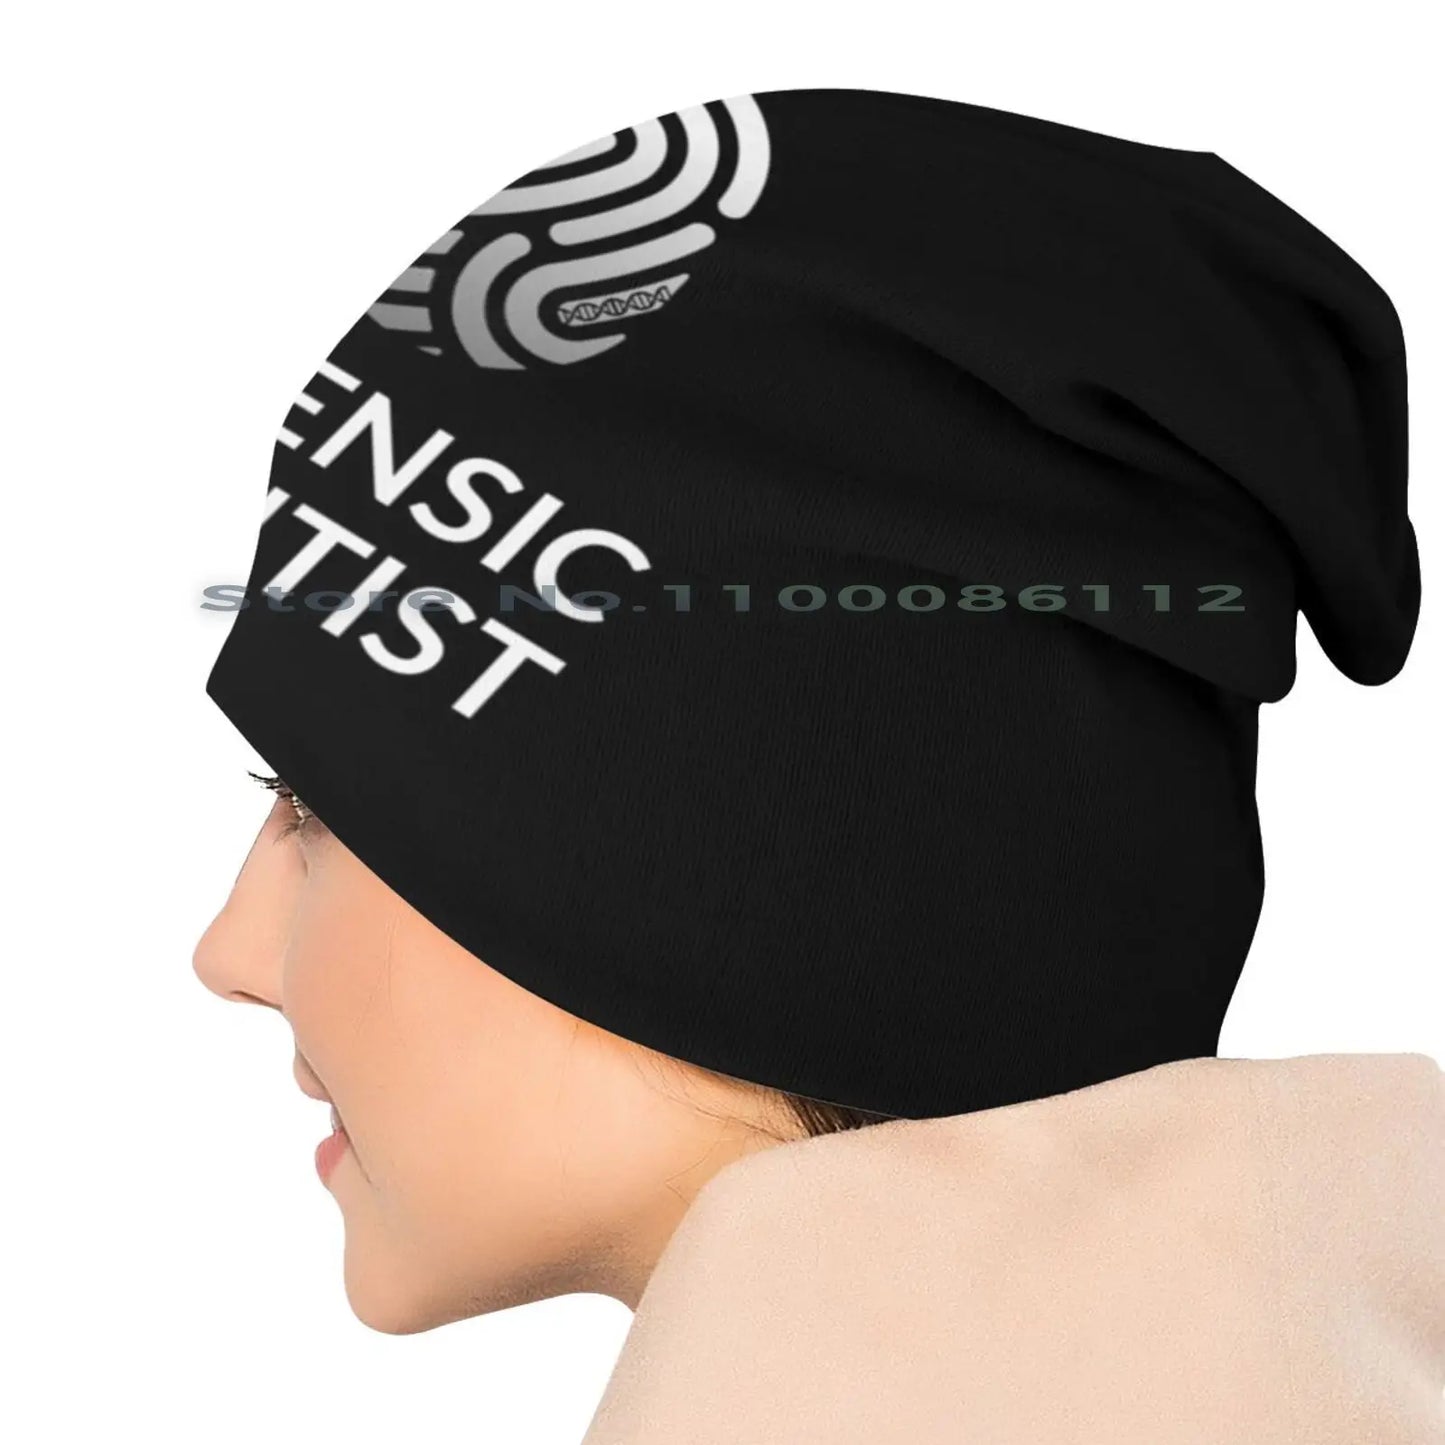 Hat - Forensic Scientist Bucket Or Knit Hats